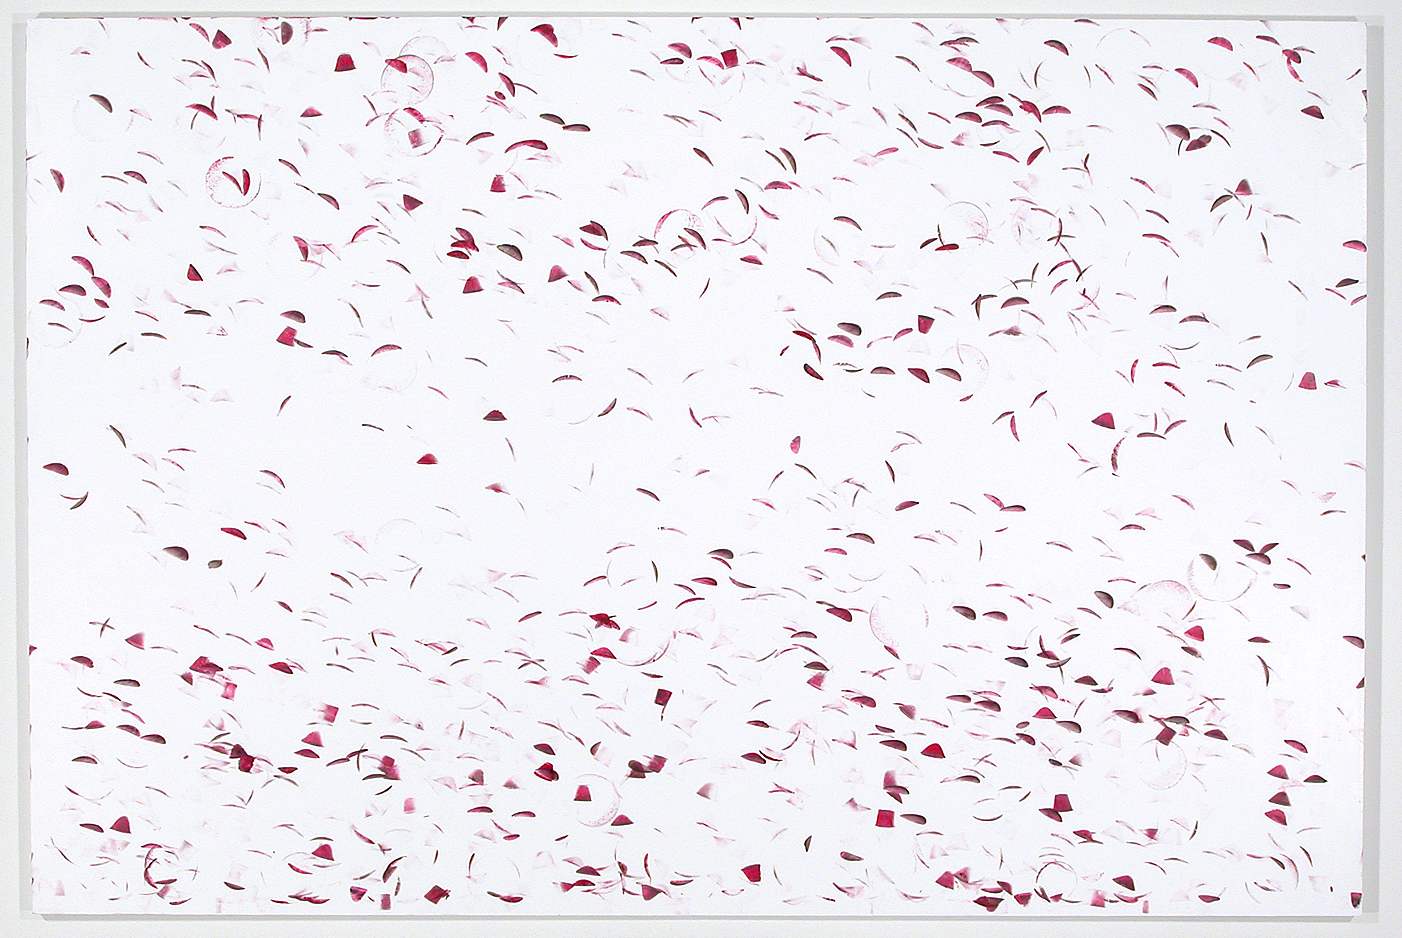 On a rectangular white panel are purple marks resembling feathers floating in the air. The marks, however, are evidence of the artist performing slapshots. With painted covered hockey pucks, the artist (who is also a hockey player) repeatedly performed their slapshot on a white painted panel creating a commentary on abstract expressionism. From a distance, the marks resemble a murmuration of birds flying in the sky